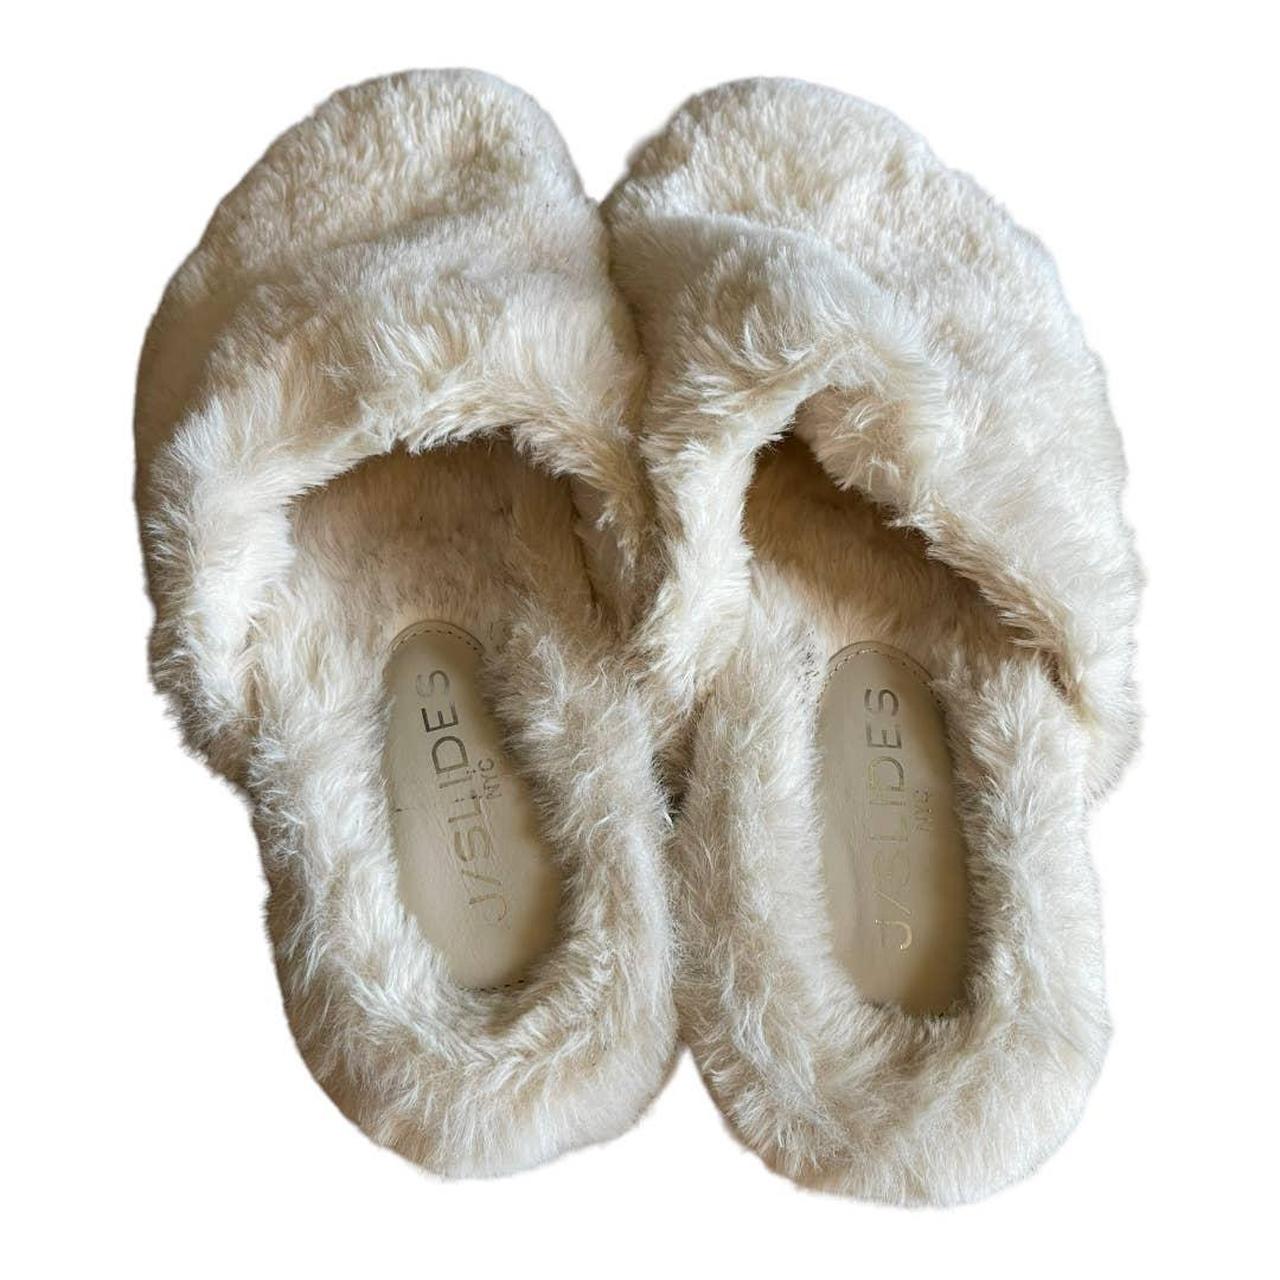 New Madden NYC Slipper Size 8 Shoes Crossband Faux Fur | Faux fur slippers,  Shearling slippers, Red crocs